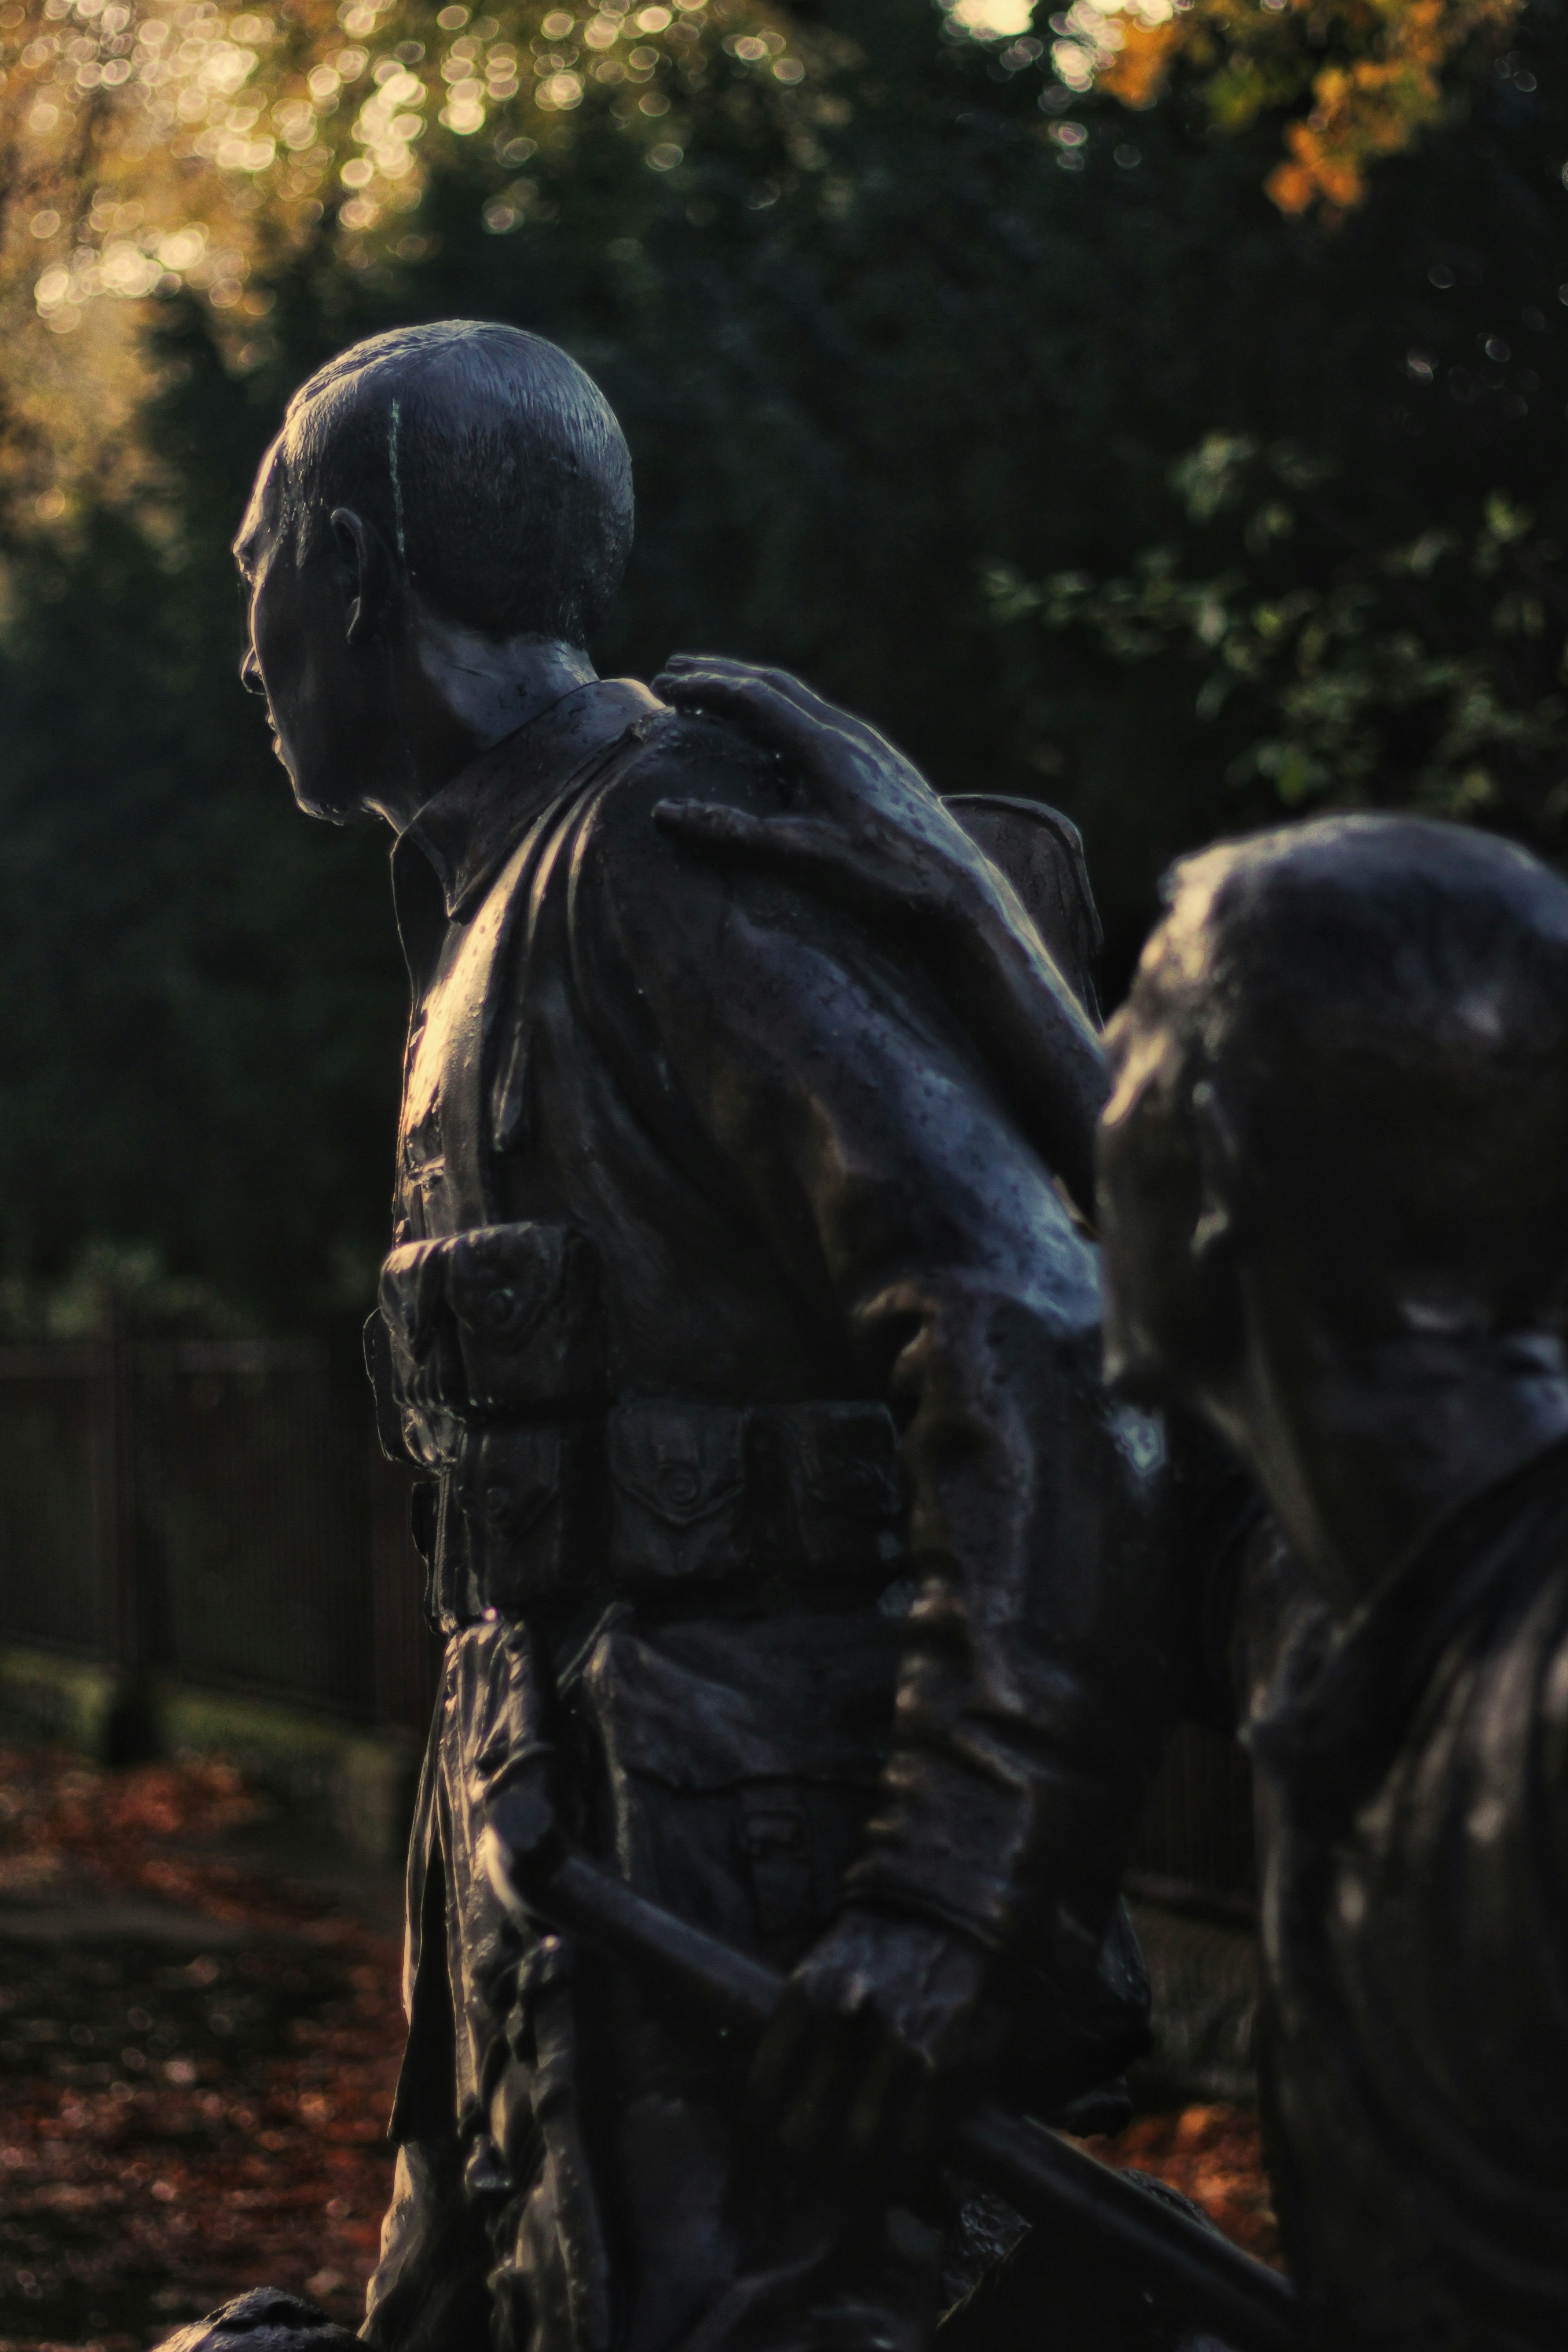 It's a monument of two soldiers which built for The Remembrance Day in Reading, England.